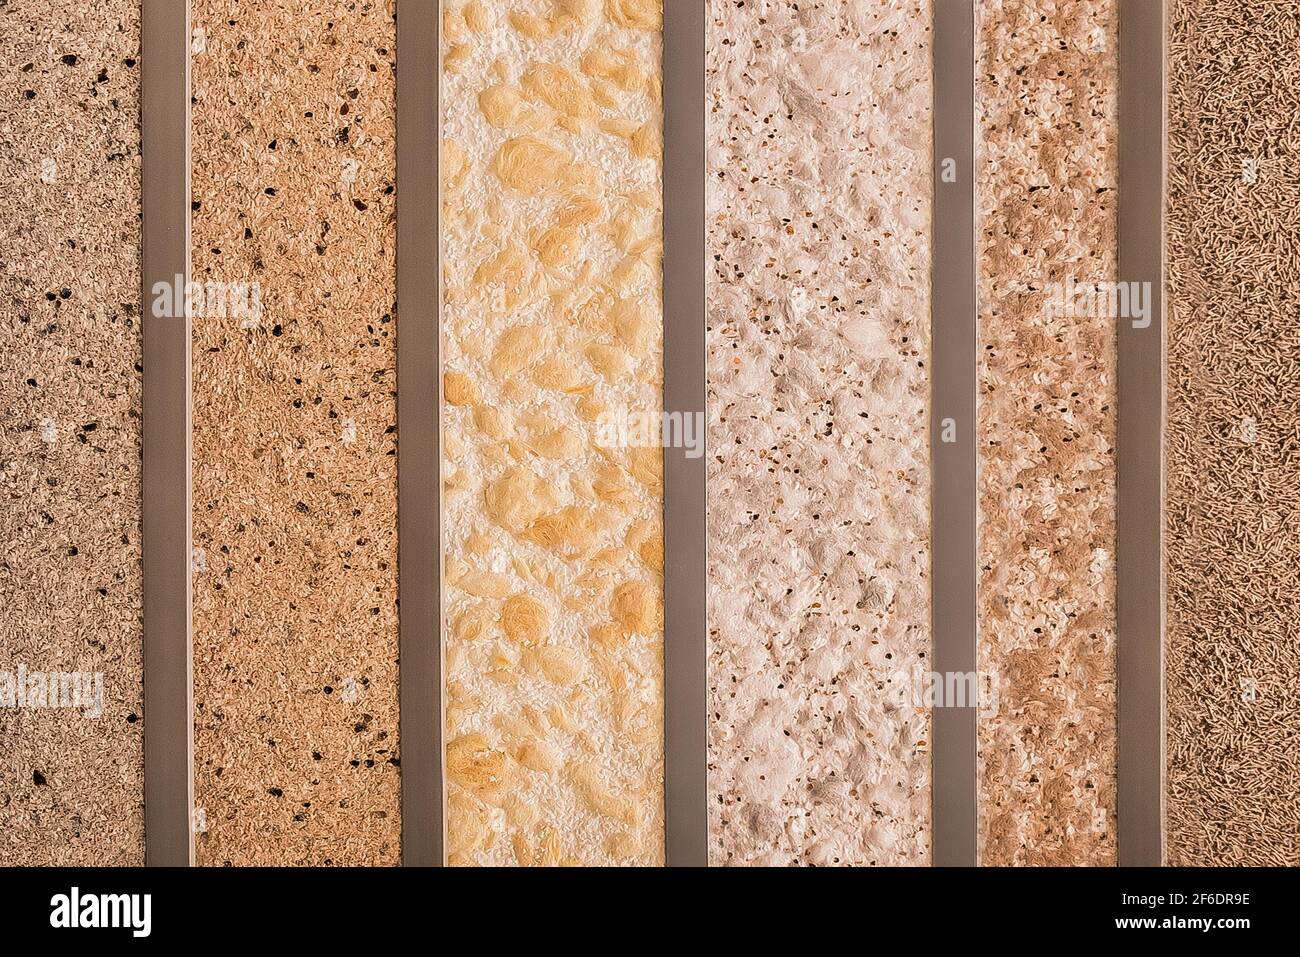 Samples of various multi-colored decorative plasters for interior design in a hardware store. Stock Photo